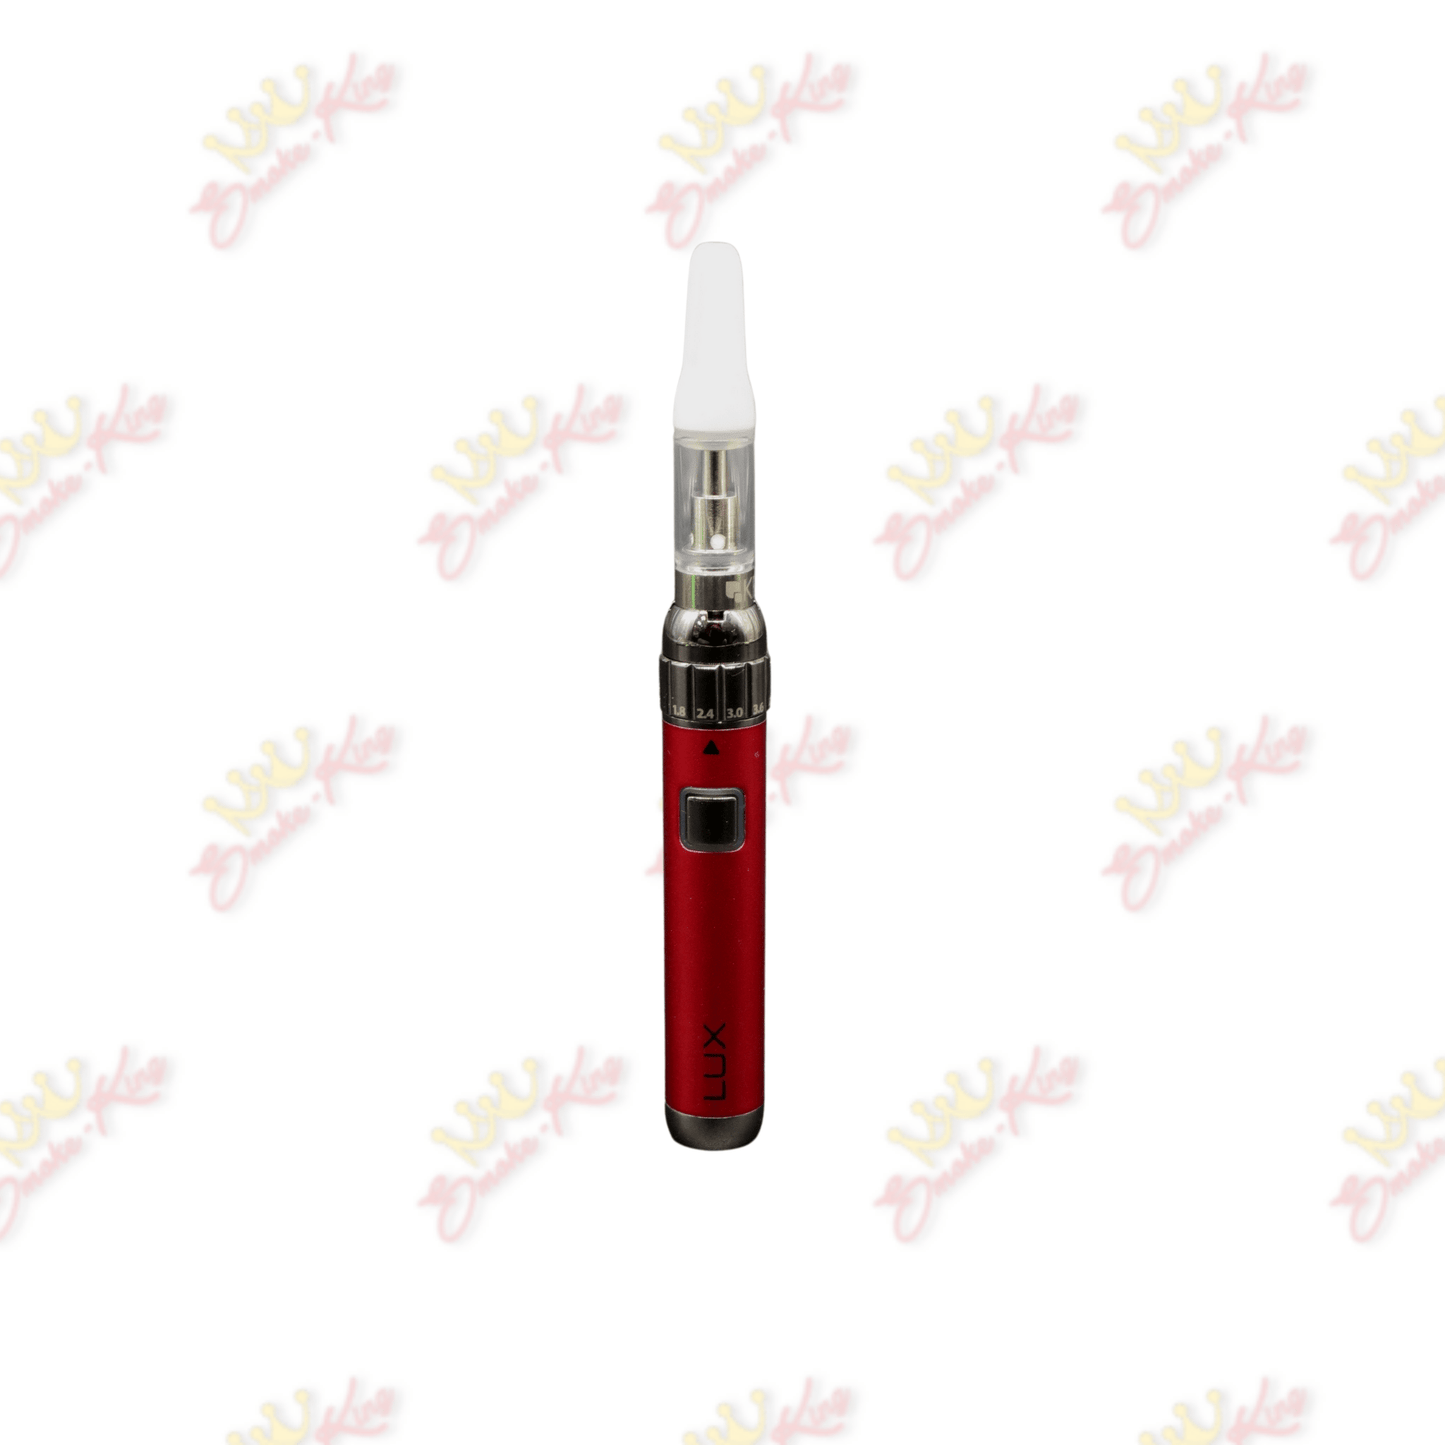 Yocan Lux Cart Battery